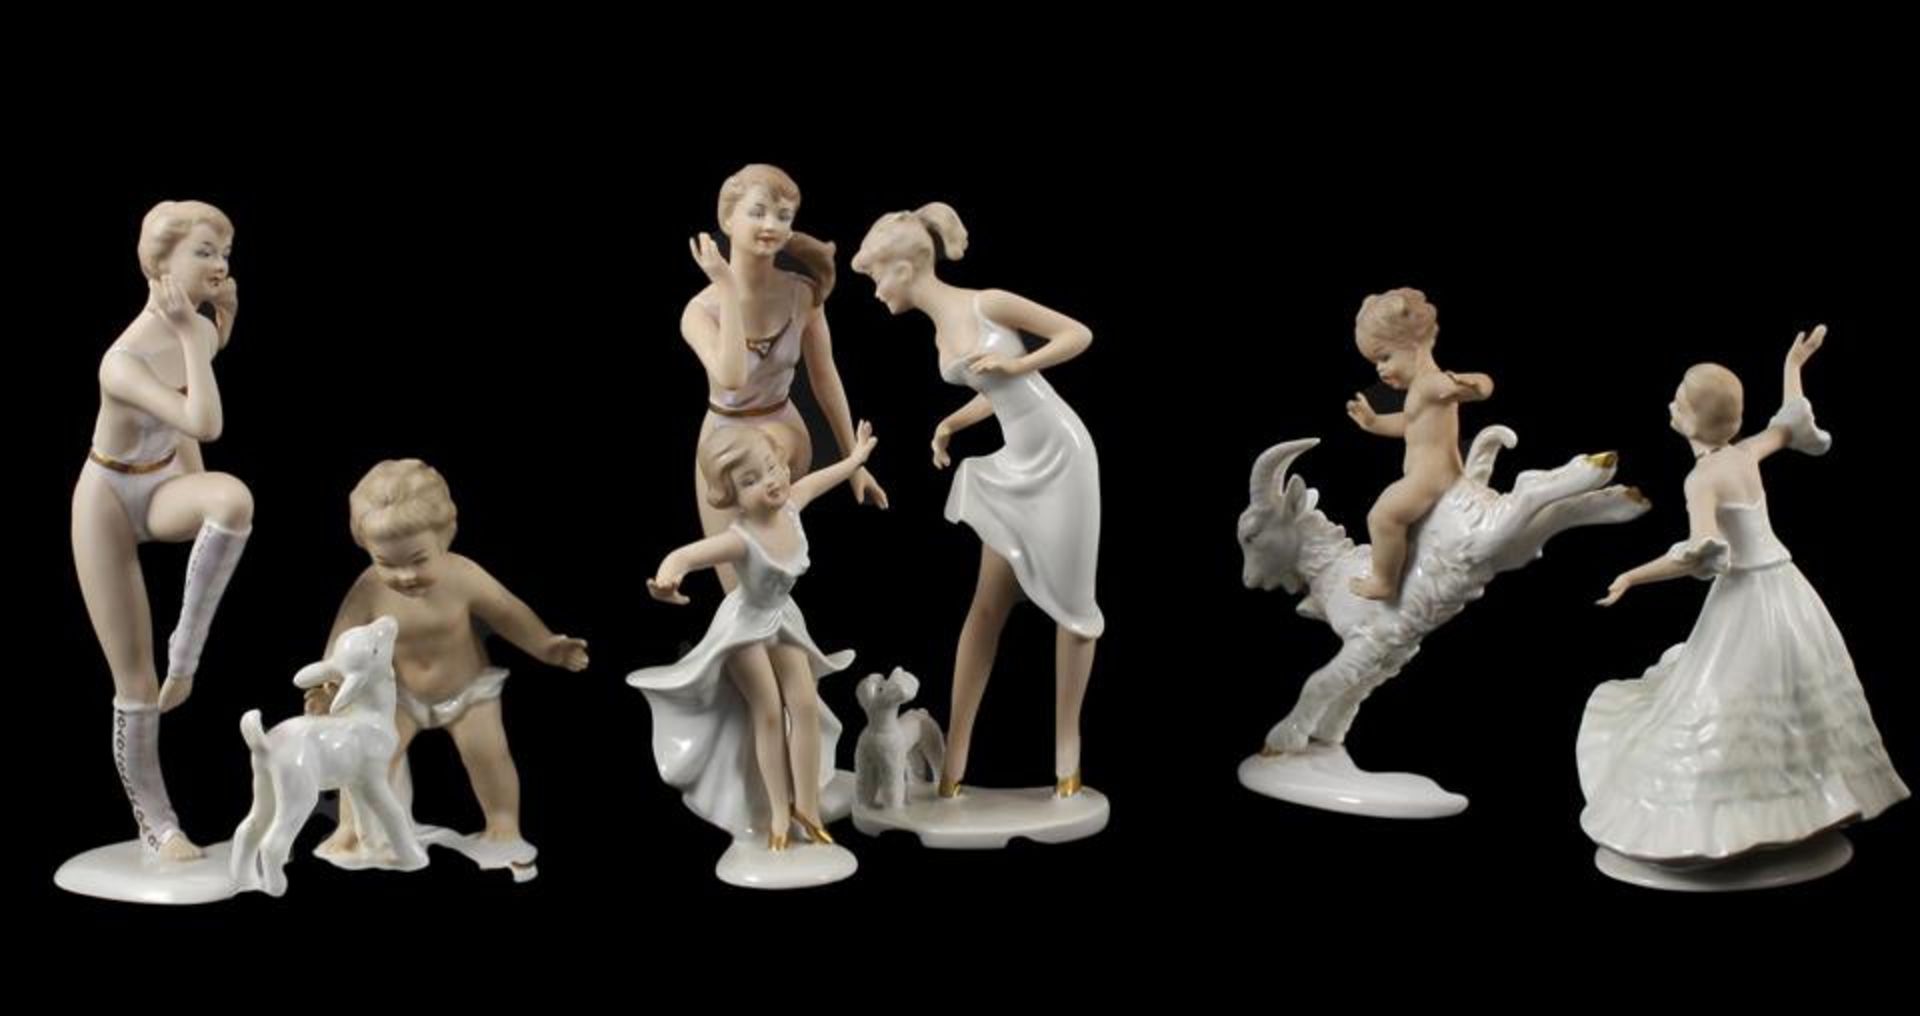 Wallendorf Thuringen Germany 7 various porcelain figurines of dancers and children with animals, the